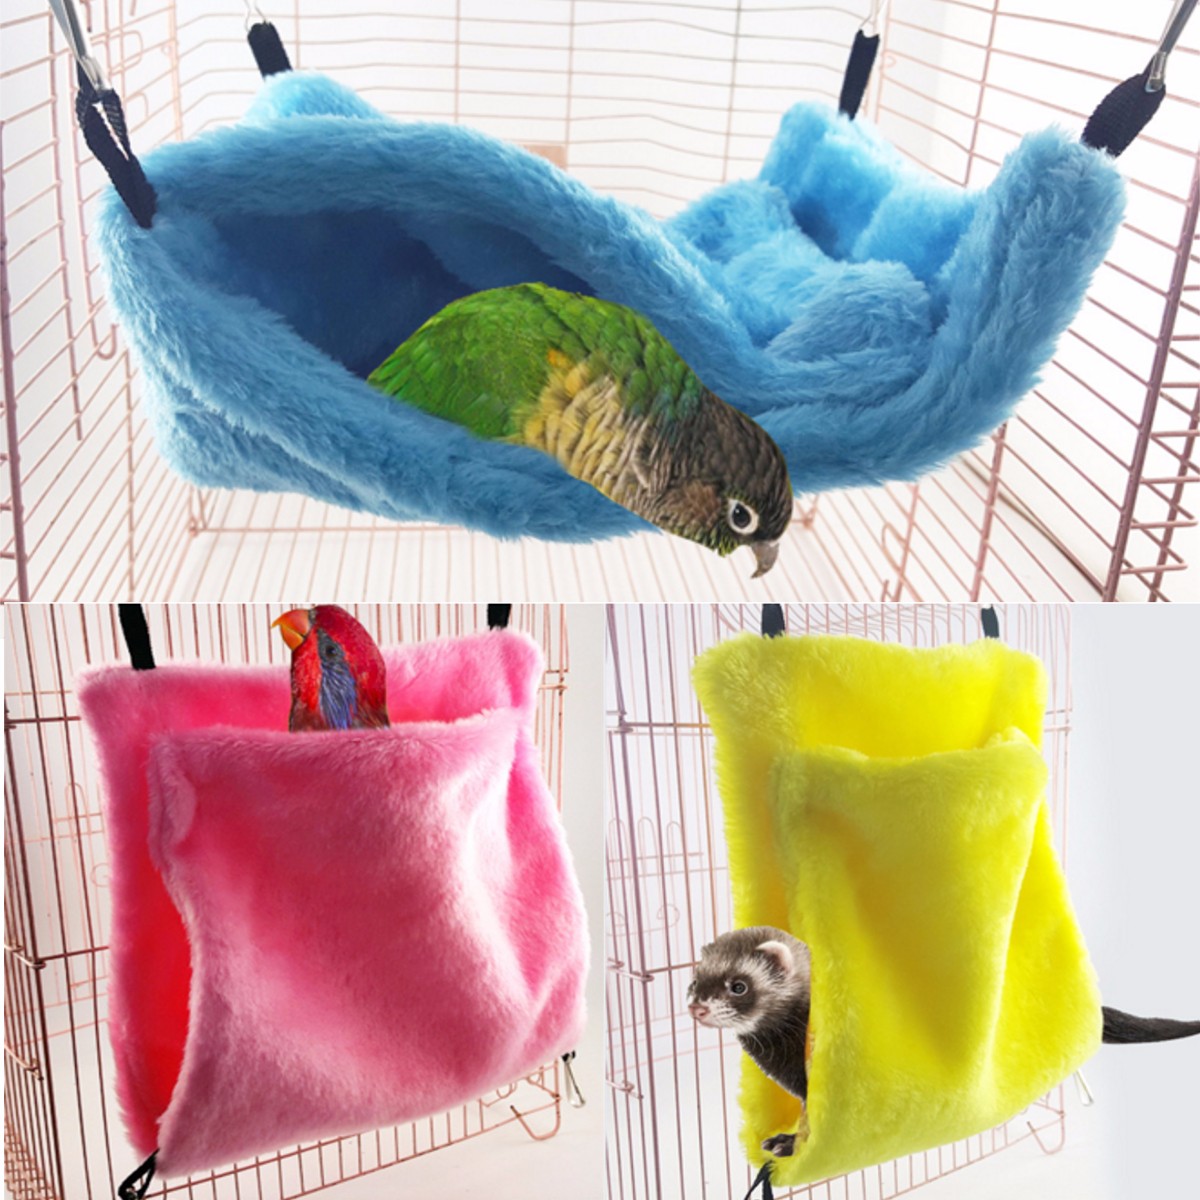 New-Bird-Parrot-Pet-Bite-Toy-Chew-Toys-Swing-Cages-For-Cockatiel-Parakeet-Conure-1217018